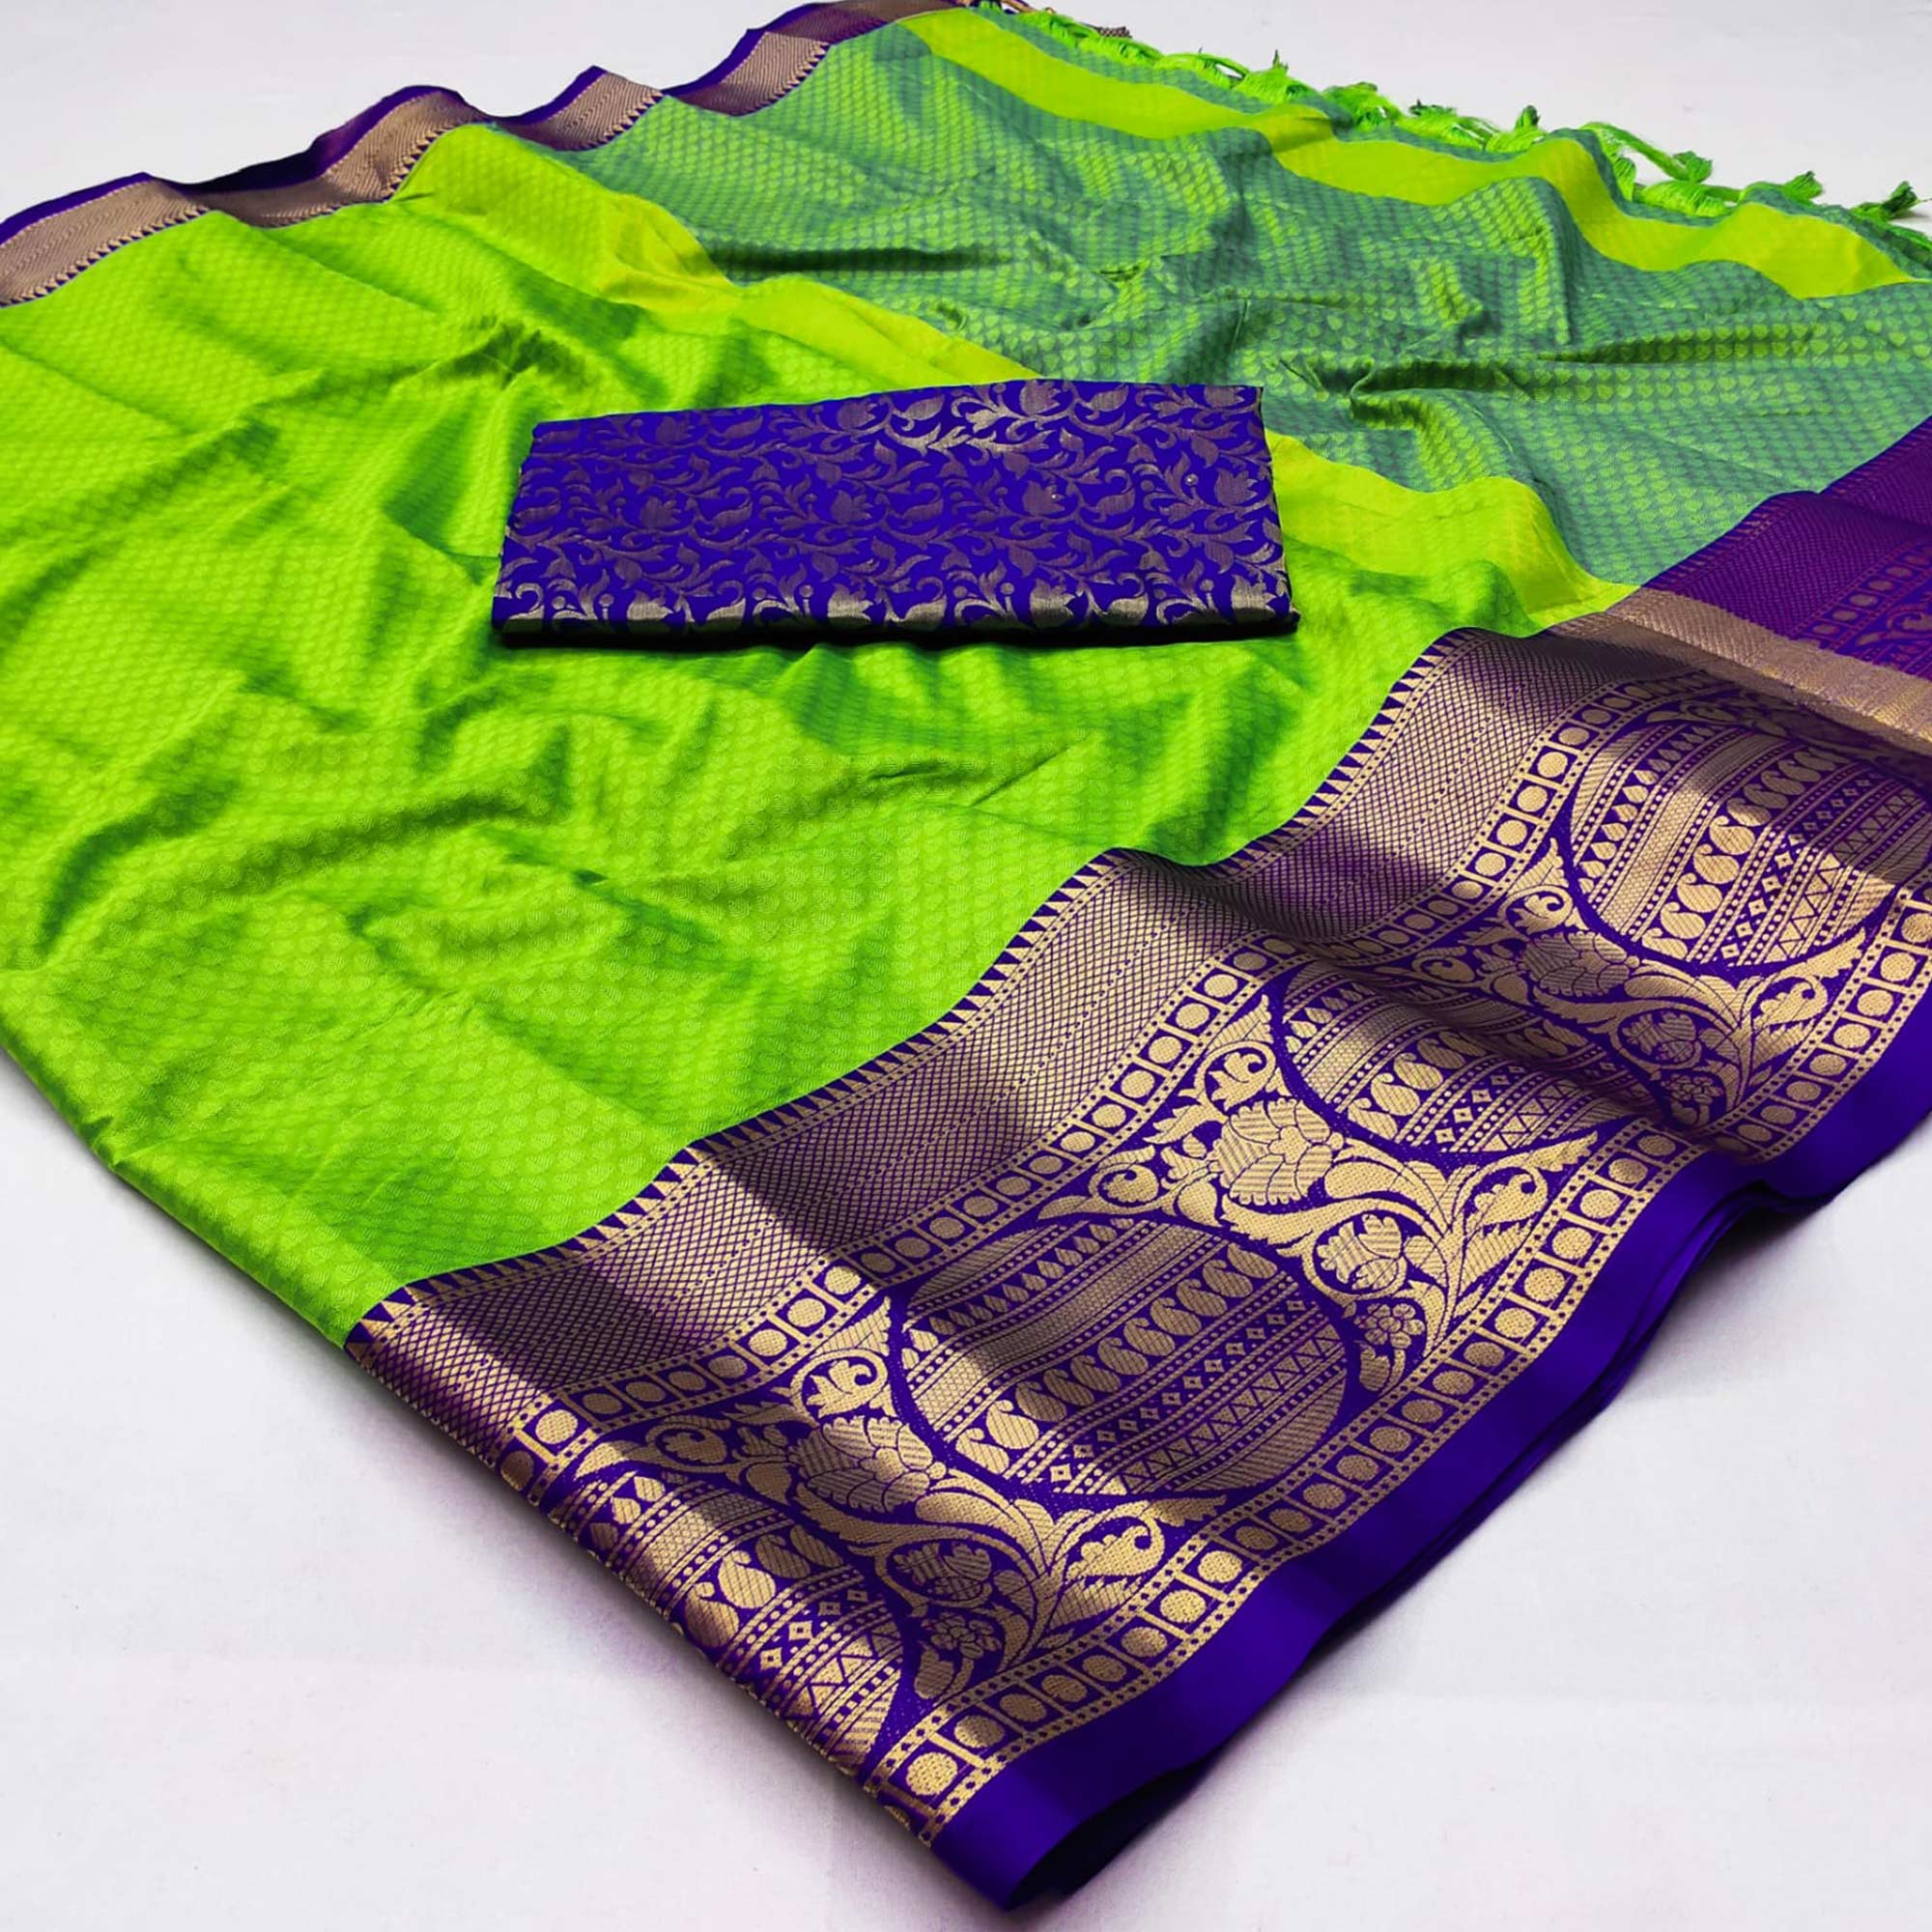 Parrot Green Woven Cotton Silk Saree With Tassels